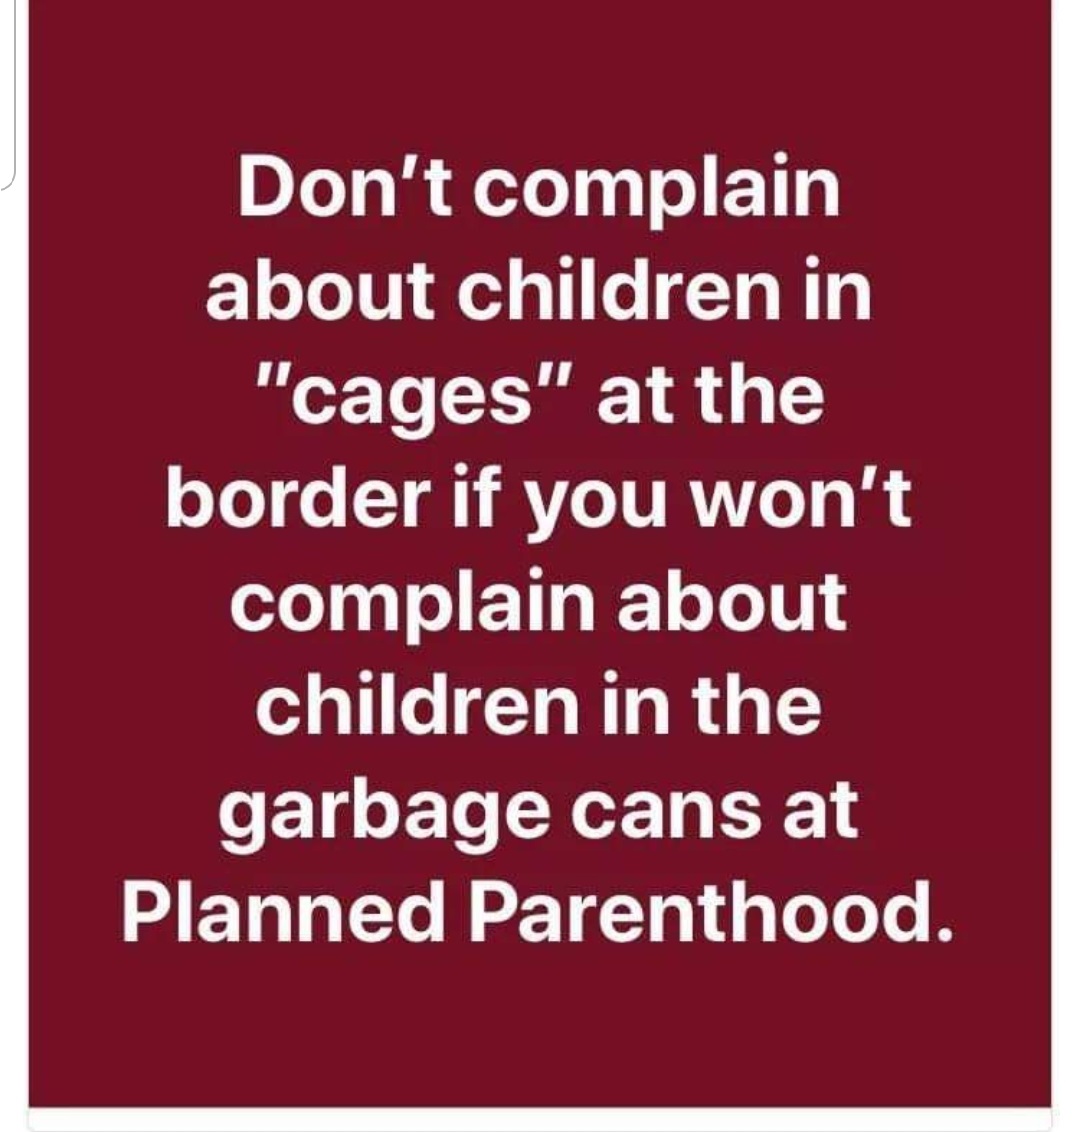 Don't complain about children in "cages" at the border if you won't complain about children in the garbage cans at Planned Parenthood.